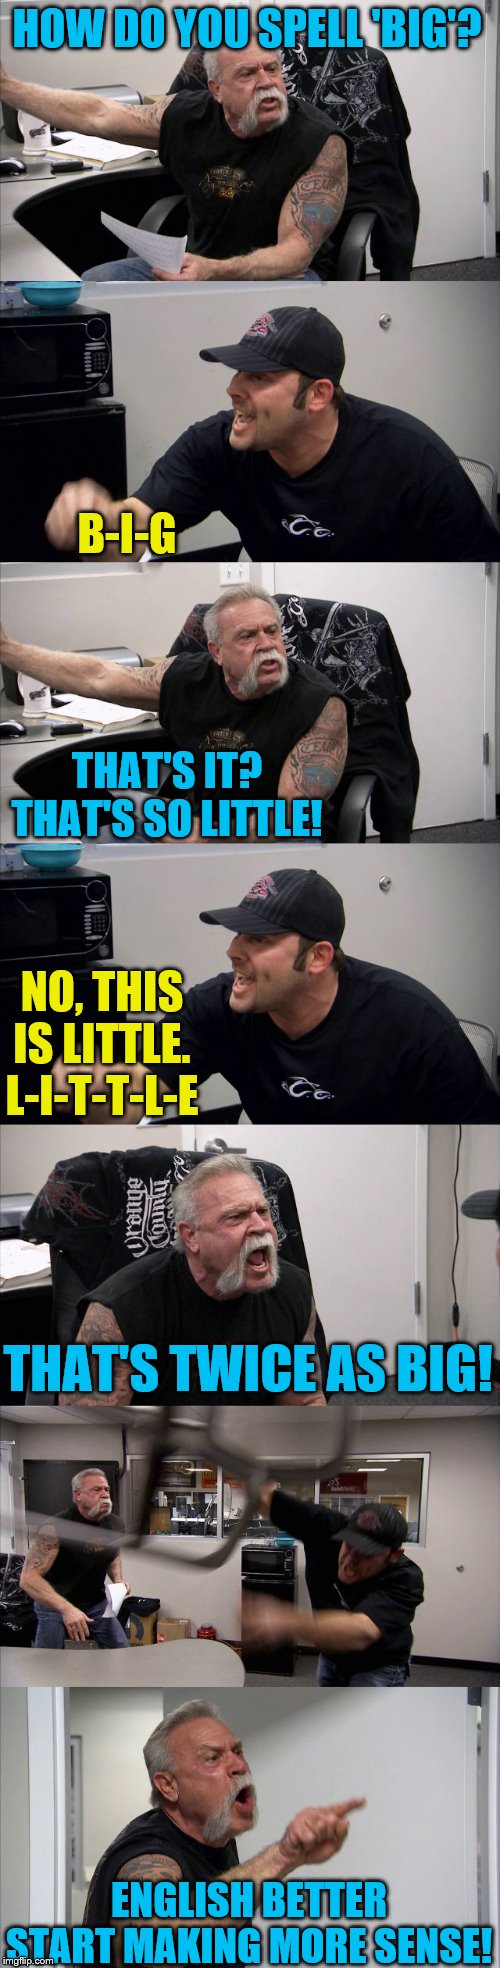 Bigger isn't always better | HOW DO YOU SPELL 'BIG'? B-I-G; THAT'S IT? THAT'S SO LITTLE! NO, THIS IS LITTLE. L-I-T-T-L-E; THAT'S TWICE AS BIG! ENGLISH BETTER START MAKING MORE SENSE! | image tagged in memes,american chopper argument,language | made w/ Imgflip meme maker